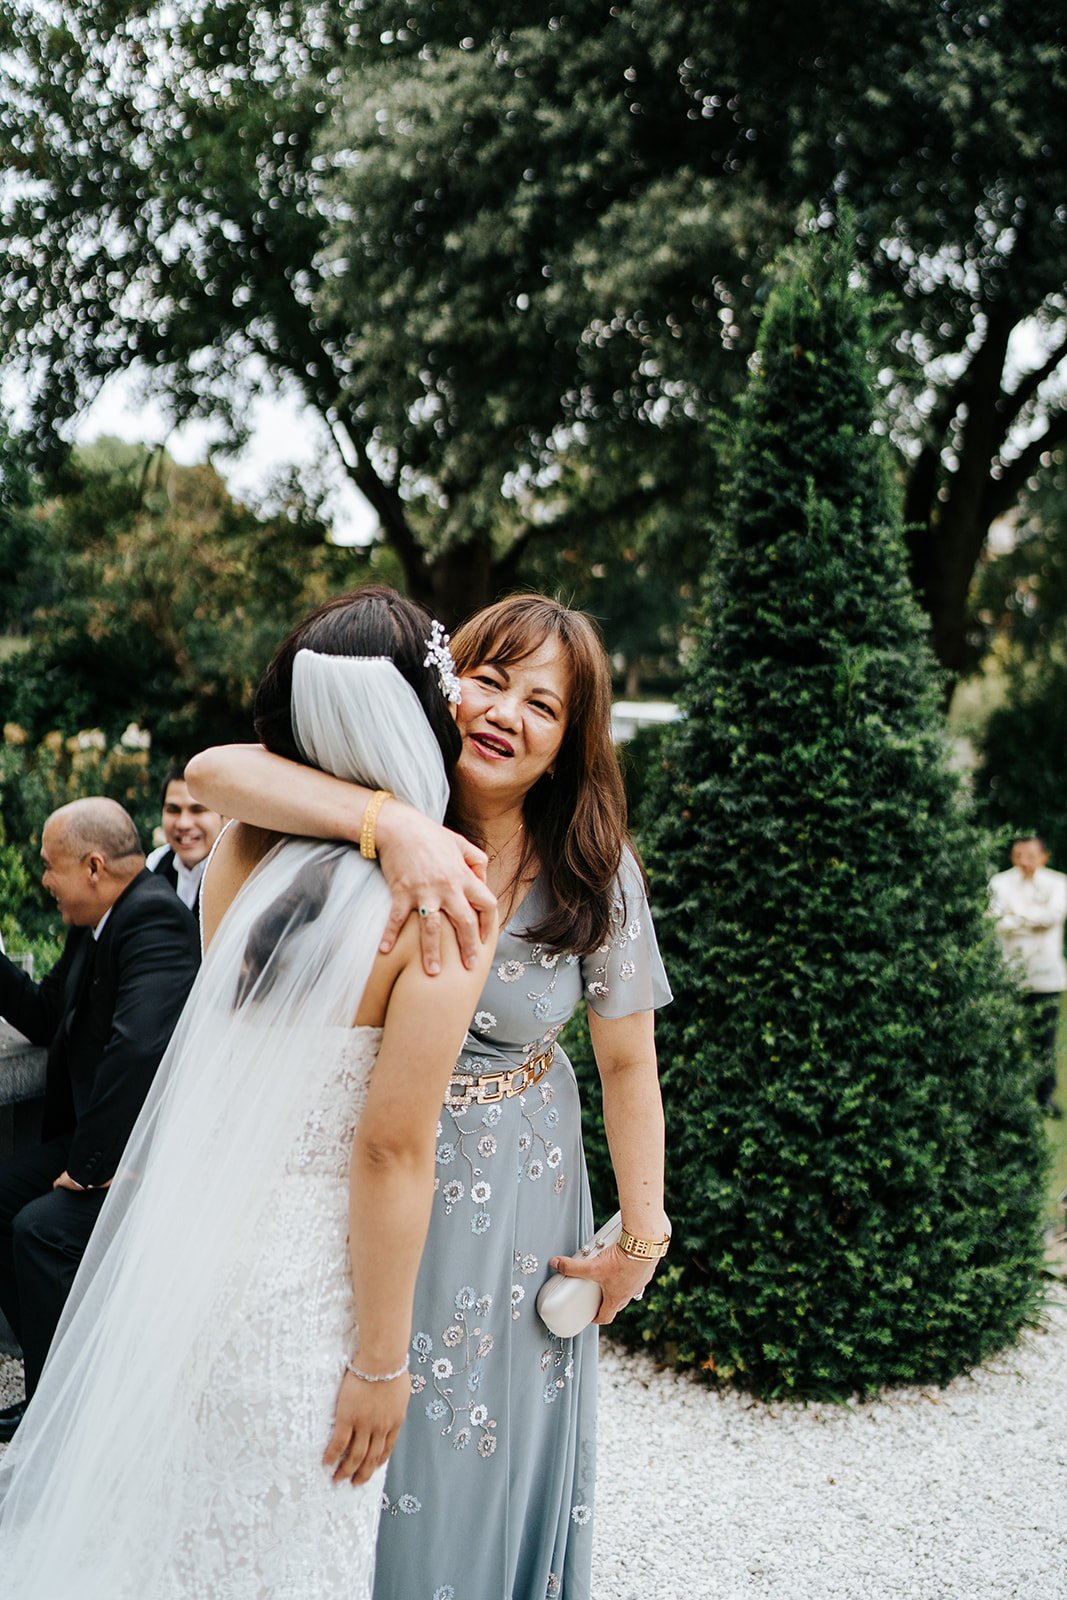 Bride hugs a close acquaintance as they both smile during tender post-ceremony moment 